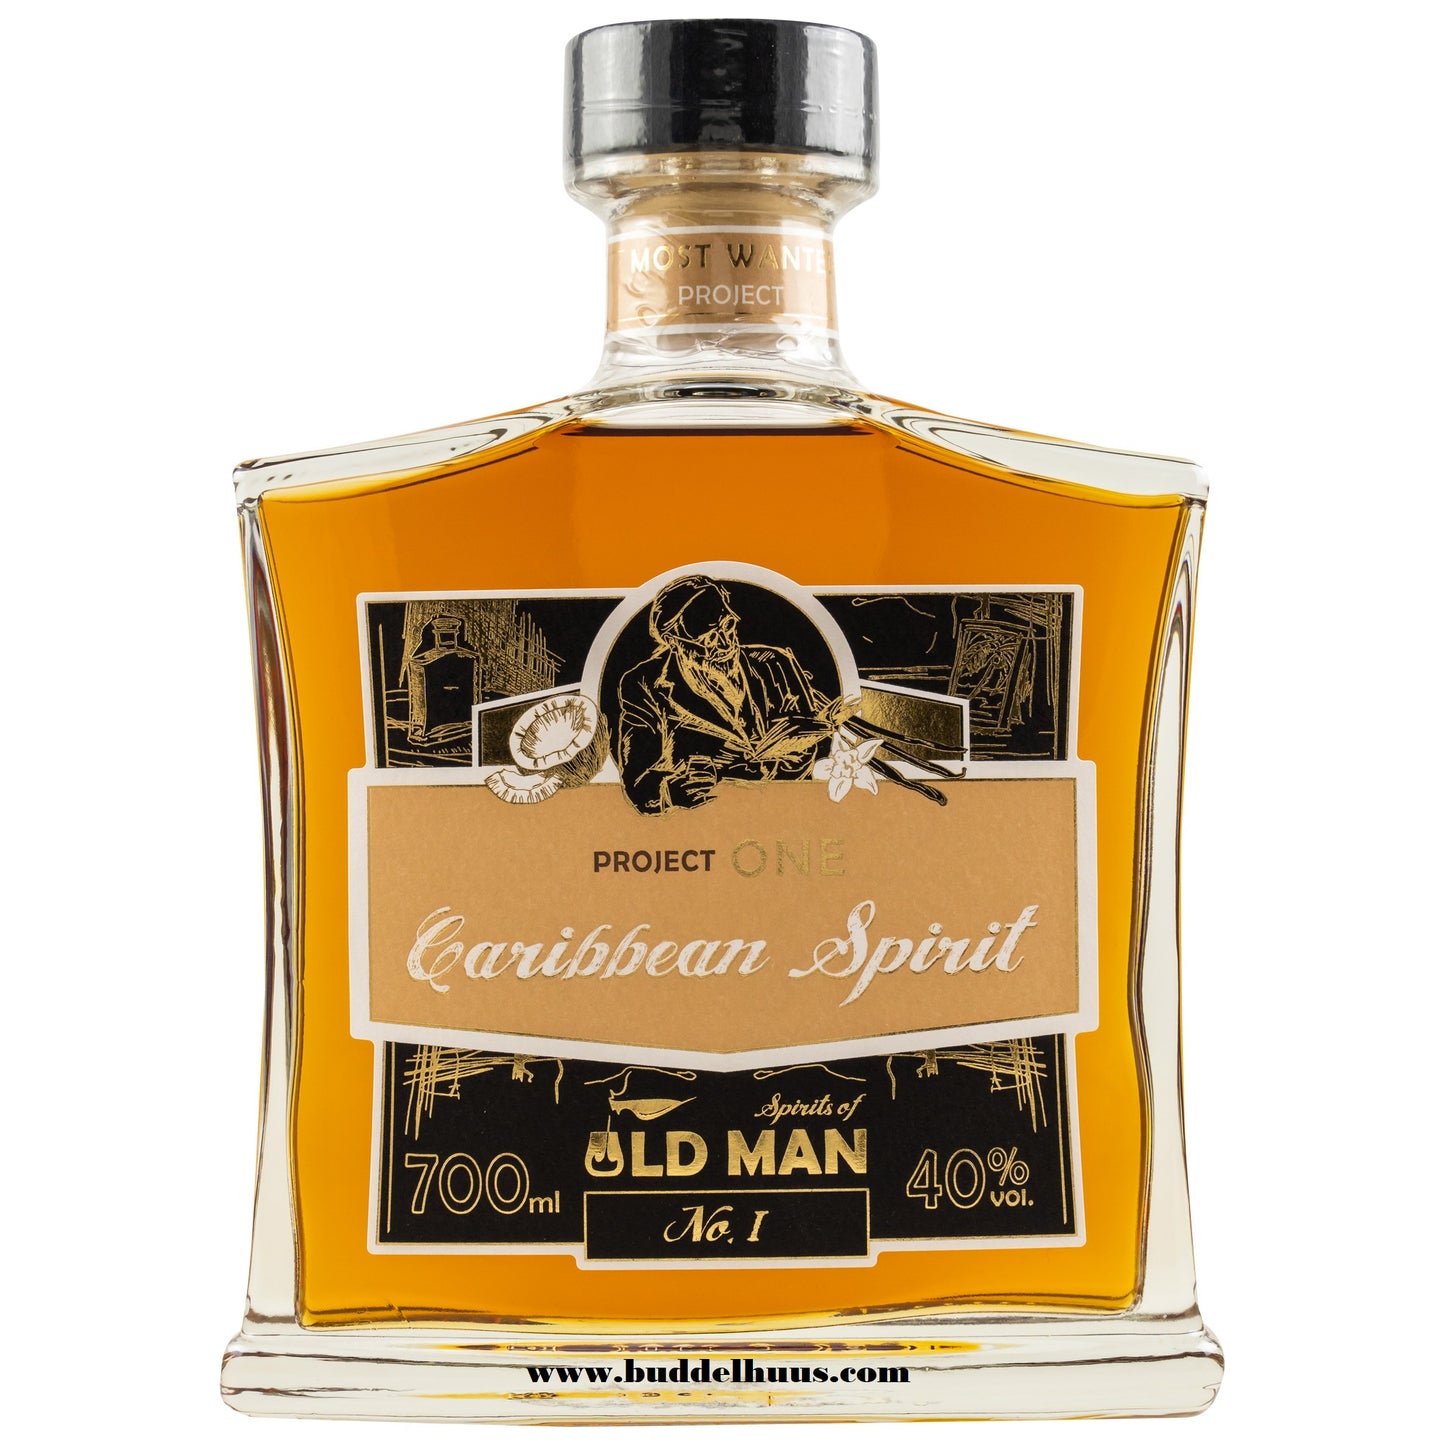 Spirits of Old Man Rum Project One - Caribbean Spirit